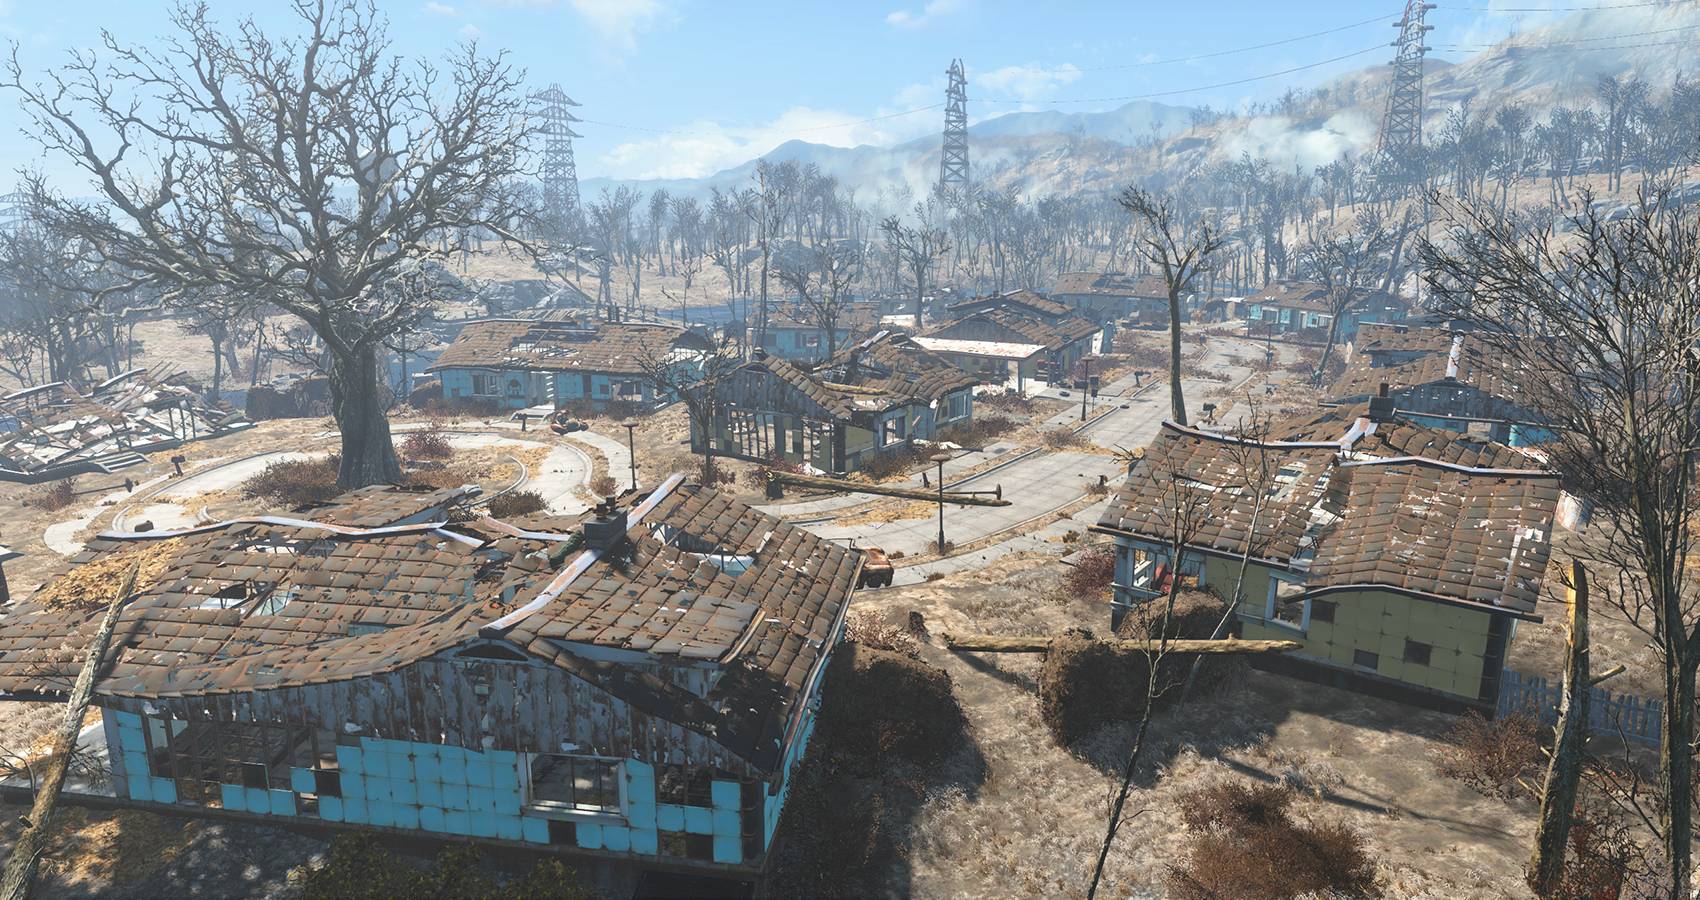 15 Best Settlements In Fallout 4 Ranked